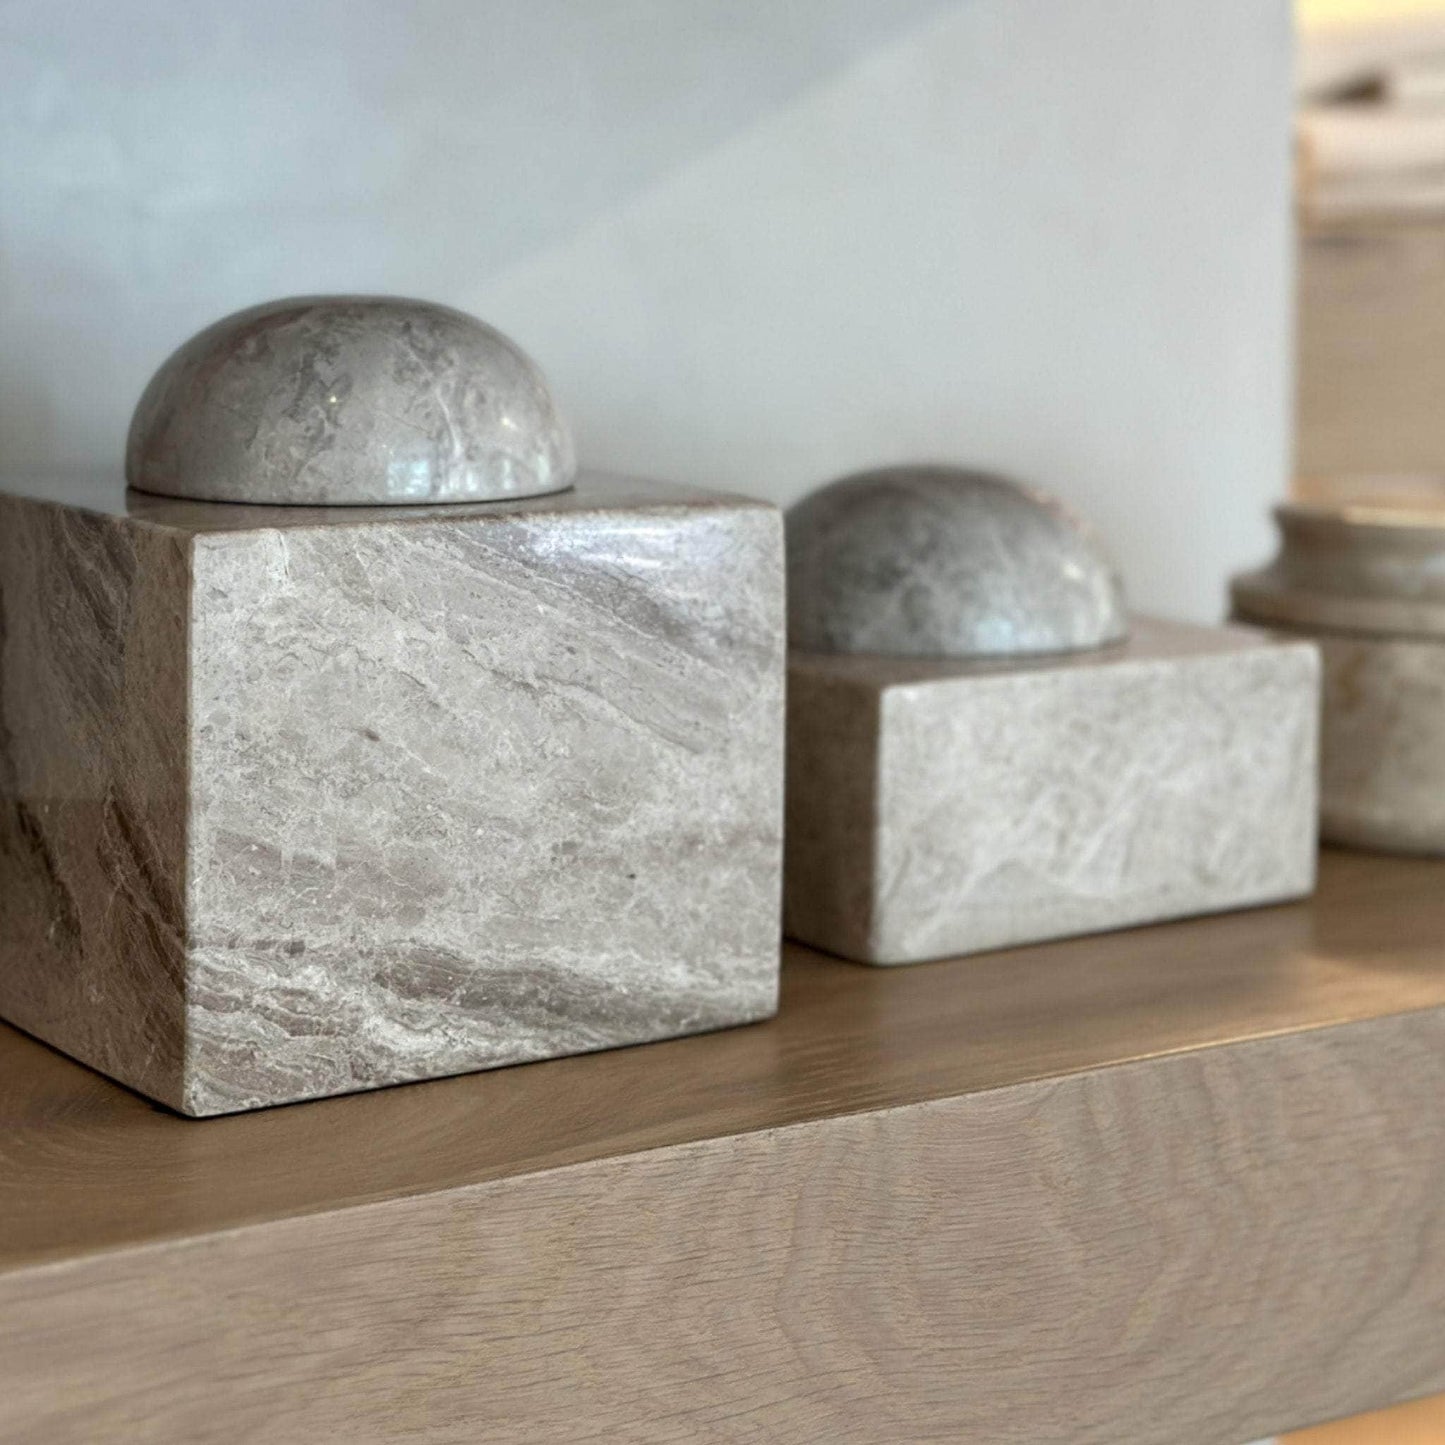 Load image into Gallery viewer, Taj Box: Large Cubed Storage Box in Oyster Italian Marble
